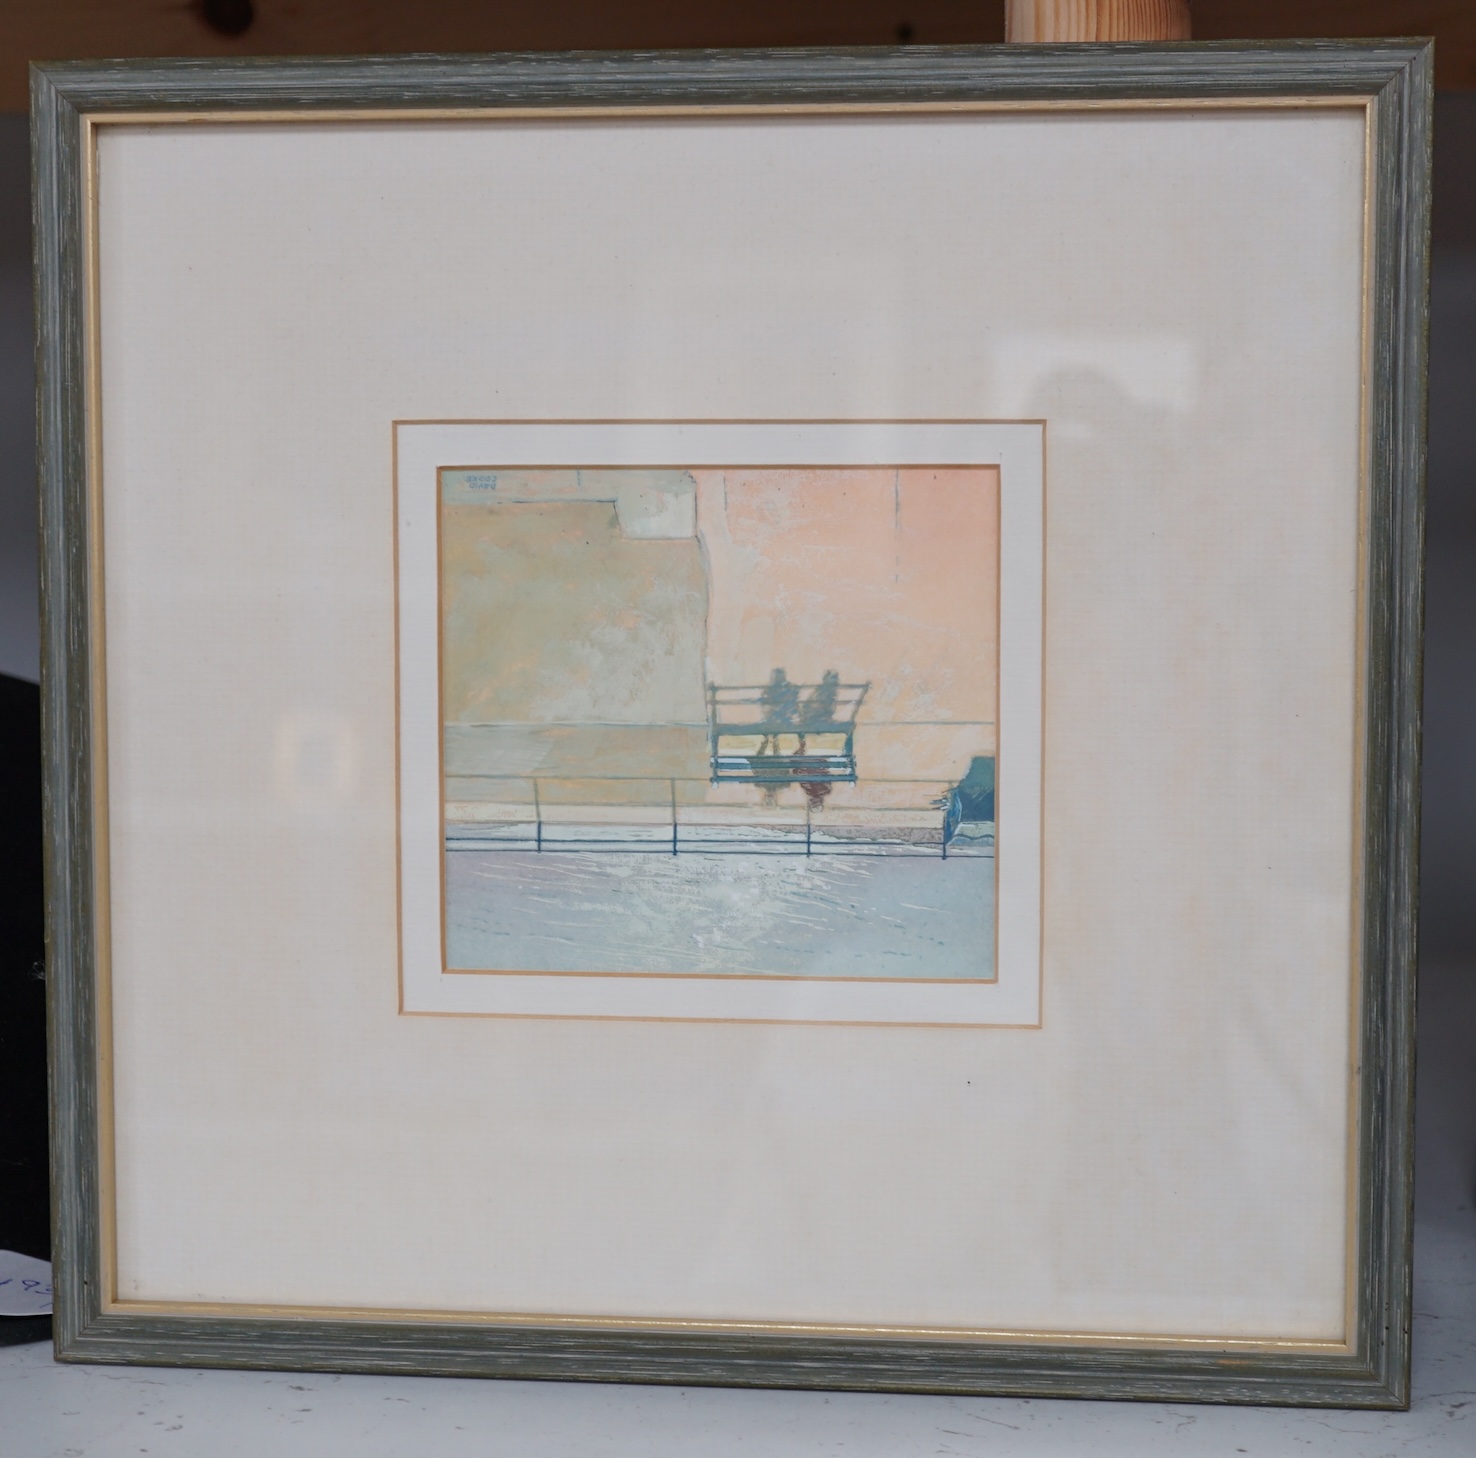 David Cooke, contemporary gouache, 'Upon Reflection', signed, 'At The Mall Galleries' inscribed exhibition label verso, 11 x 12cm. Condition - good